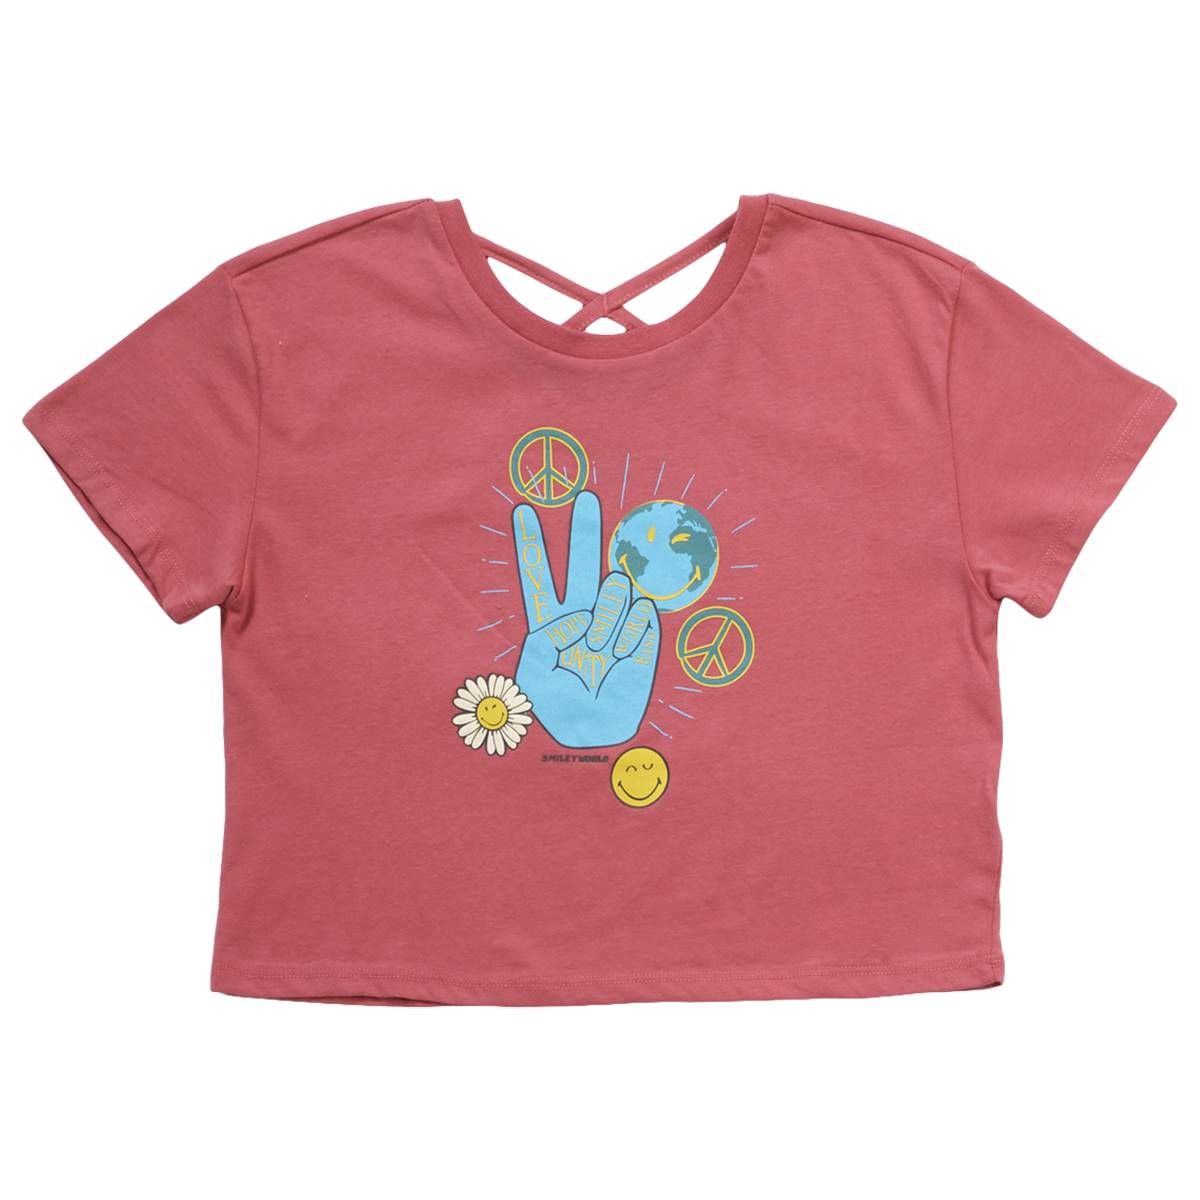 Girls (7-16) Smiley World(R) Peace Graphic Tee